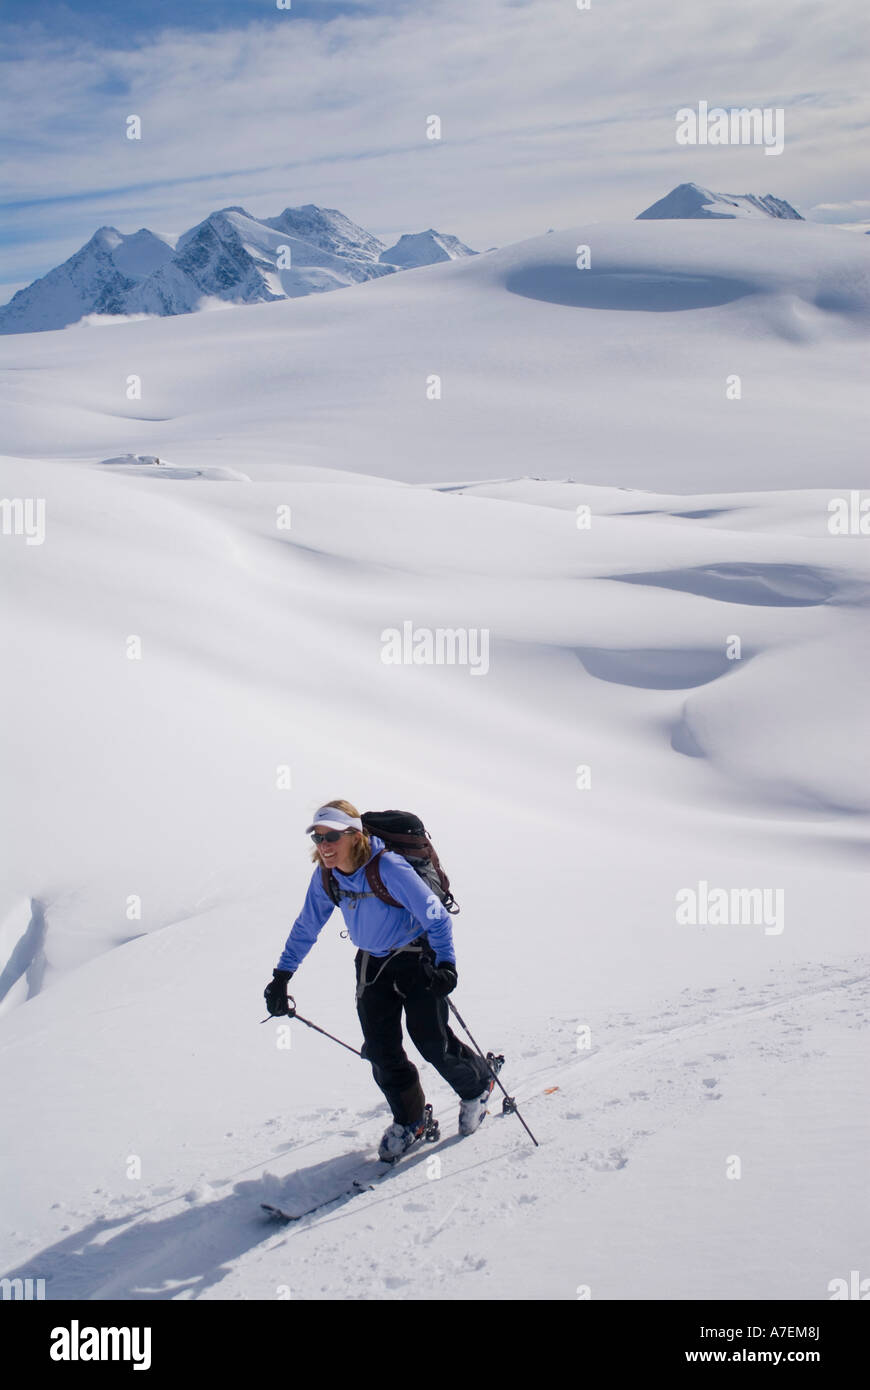 Skier skinning on The Illicilliwaet Glacier, Rogers Pass area, Selkirk Mountains, Canadian Rockies, British Columbia, Canada Stock Photo